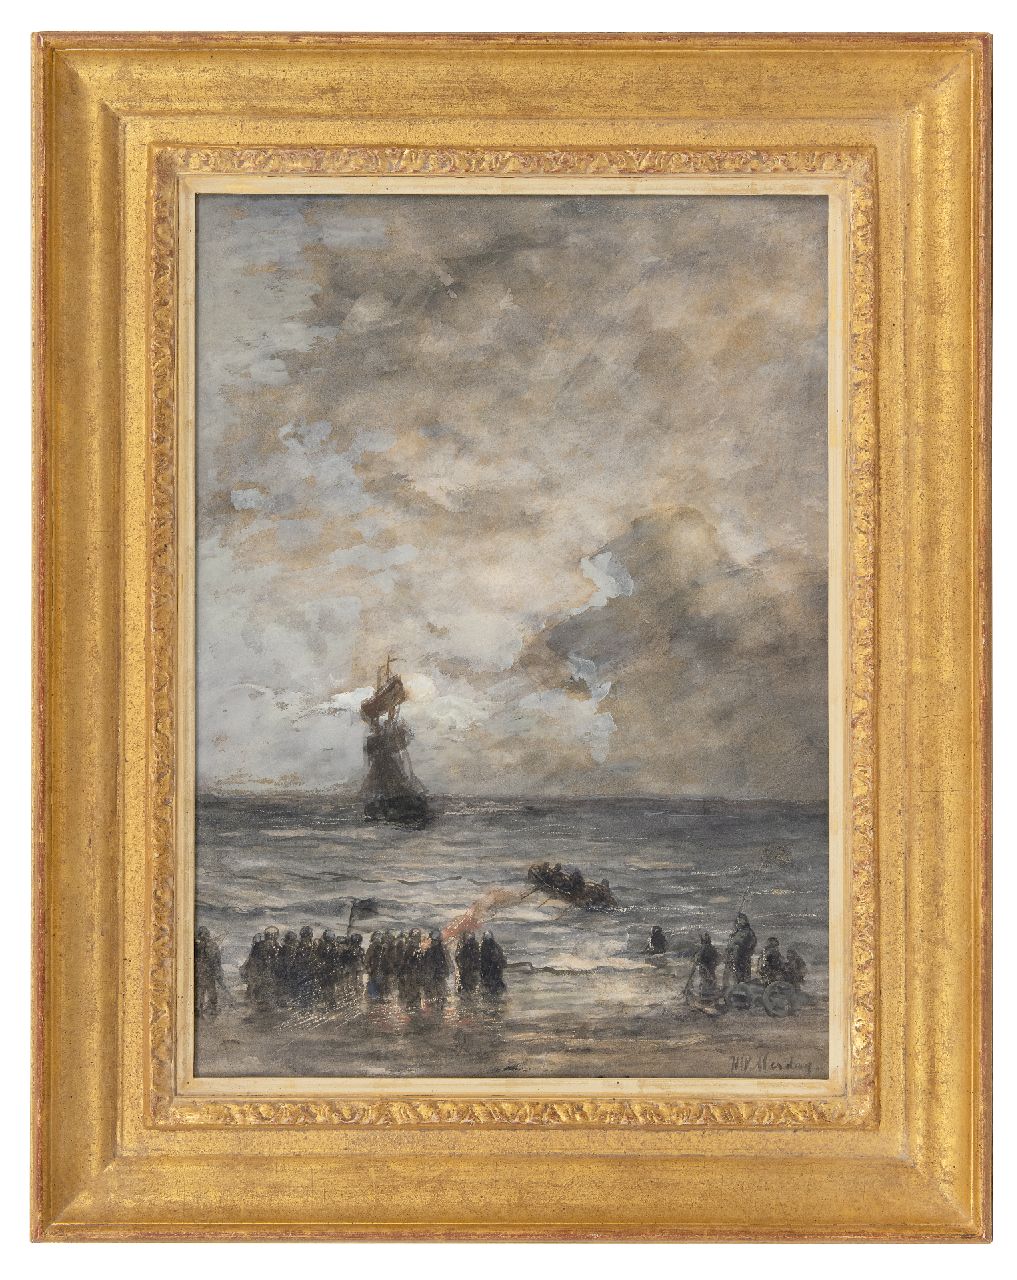 Mesdag H.W.  | Hendrik Willem Mesdag, After the storm, watercolour on paper 51.5 x 37.3 cm, signed l.r.